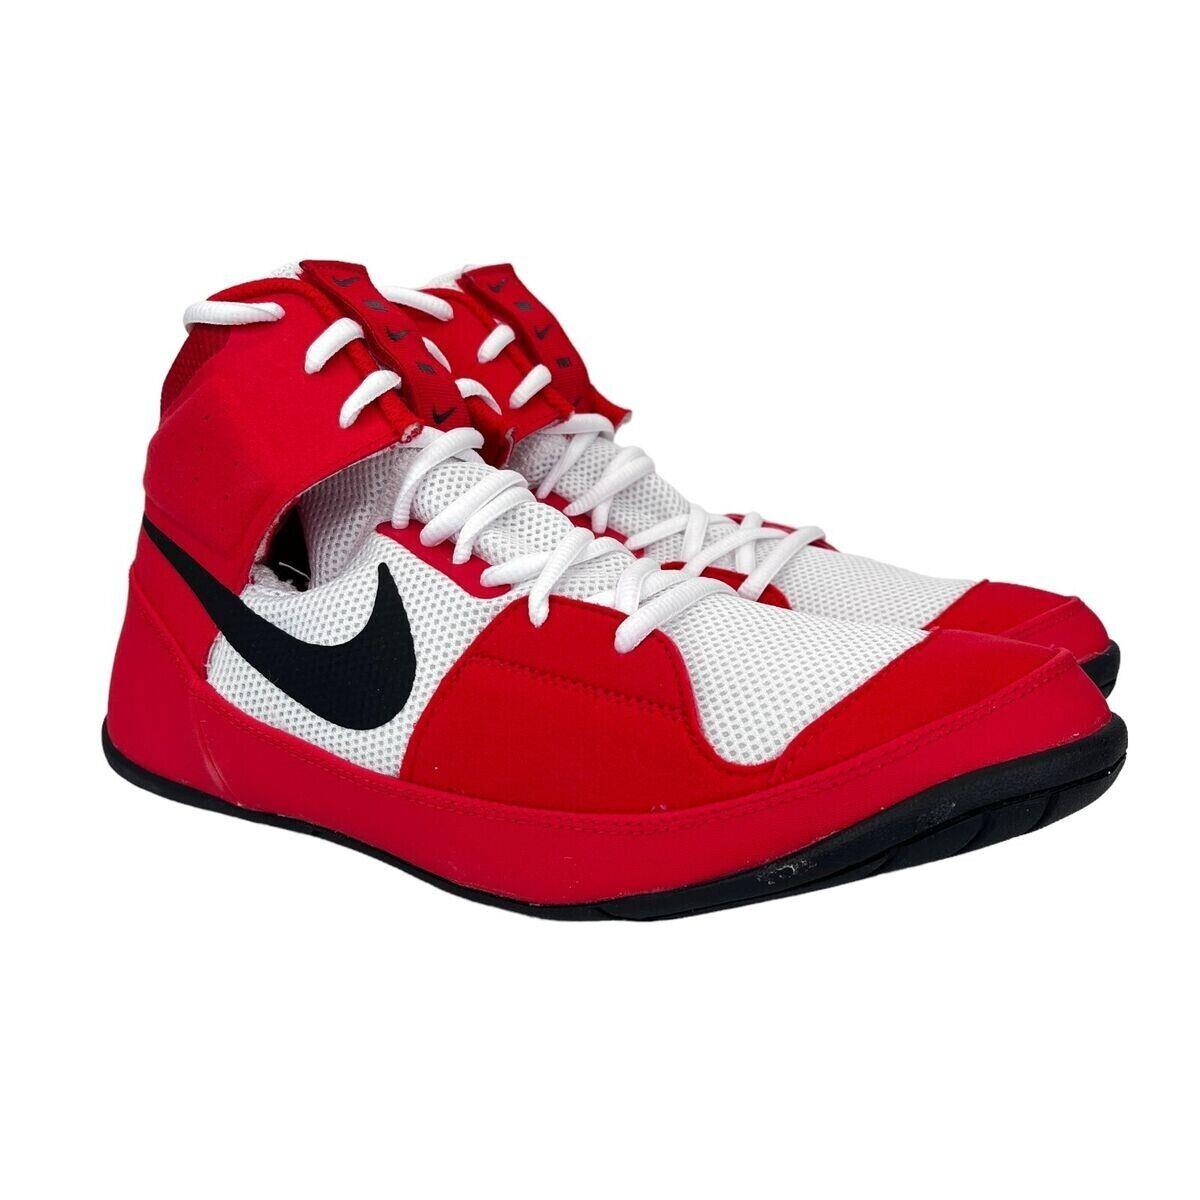 Nike Fury Men`s Size 9 Wrestling Shoes Mma Combat Red White Black AO2416-601 - Red